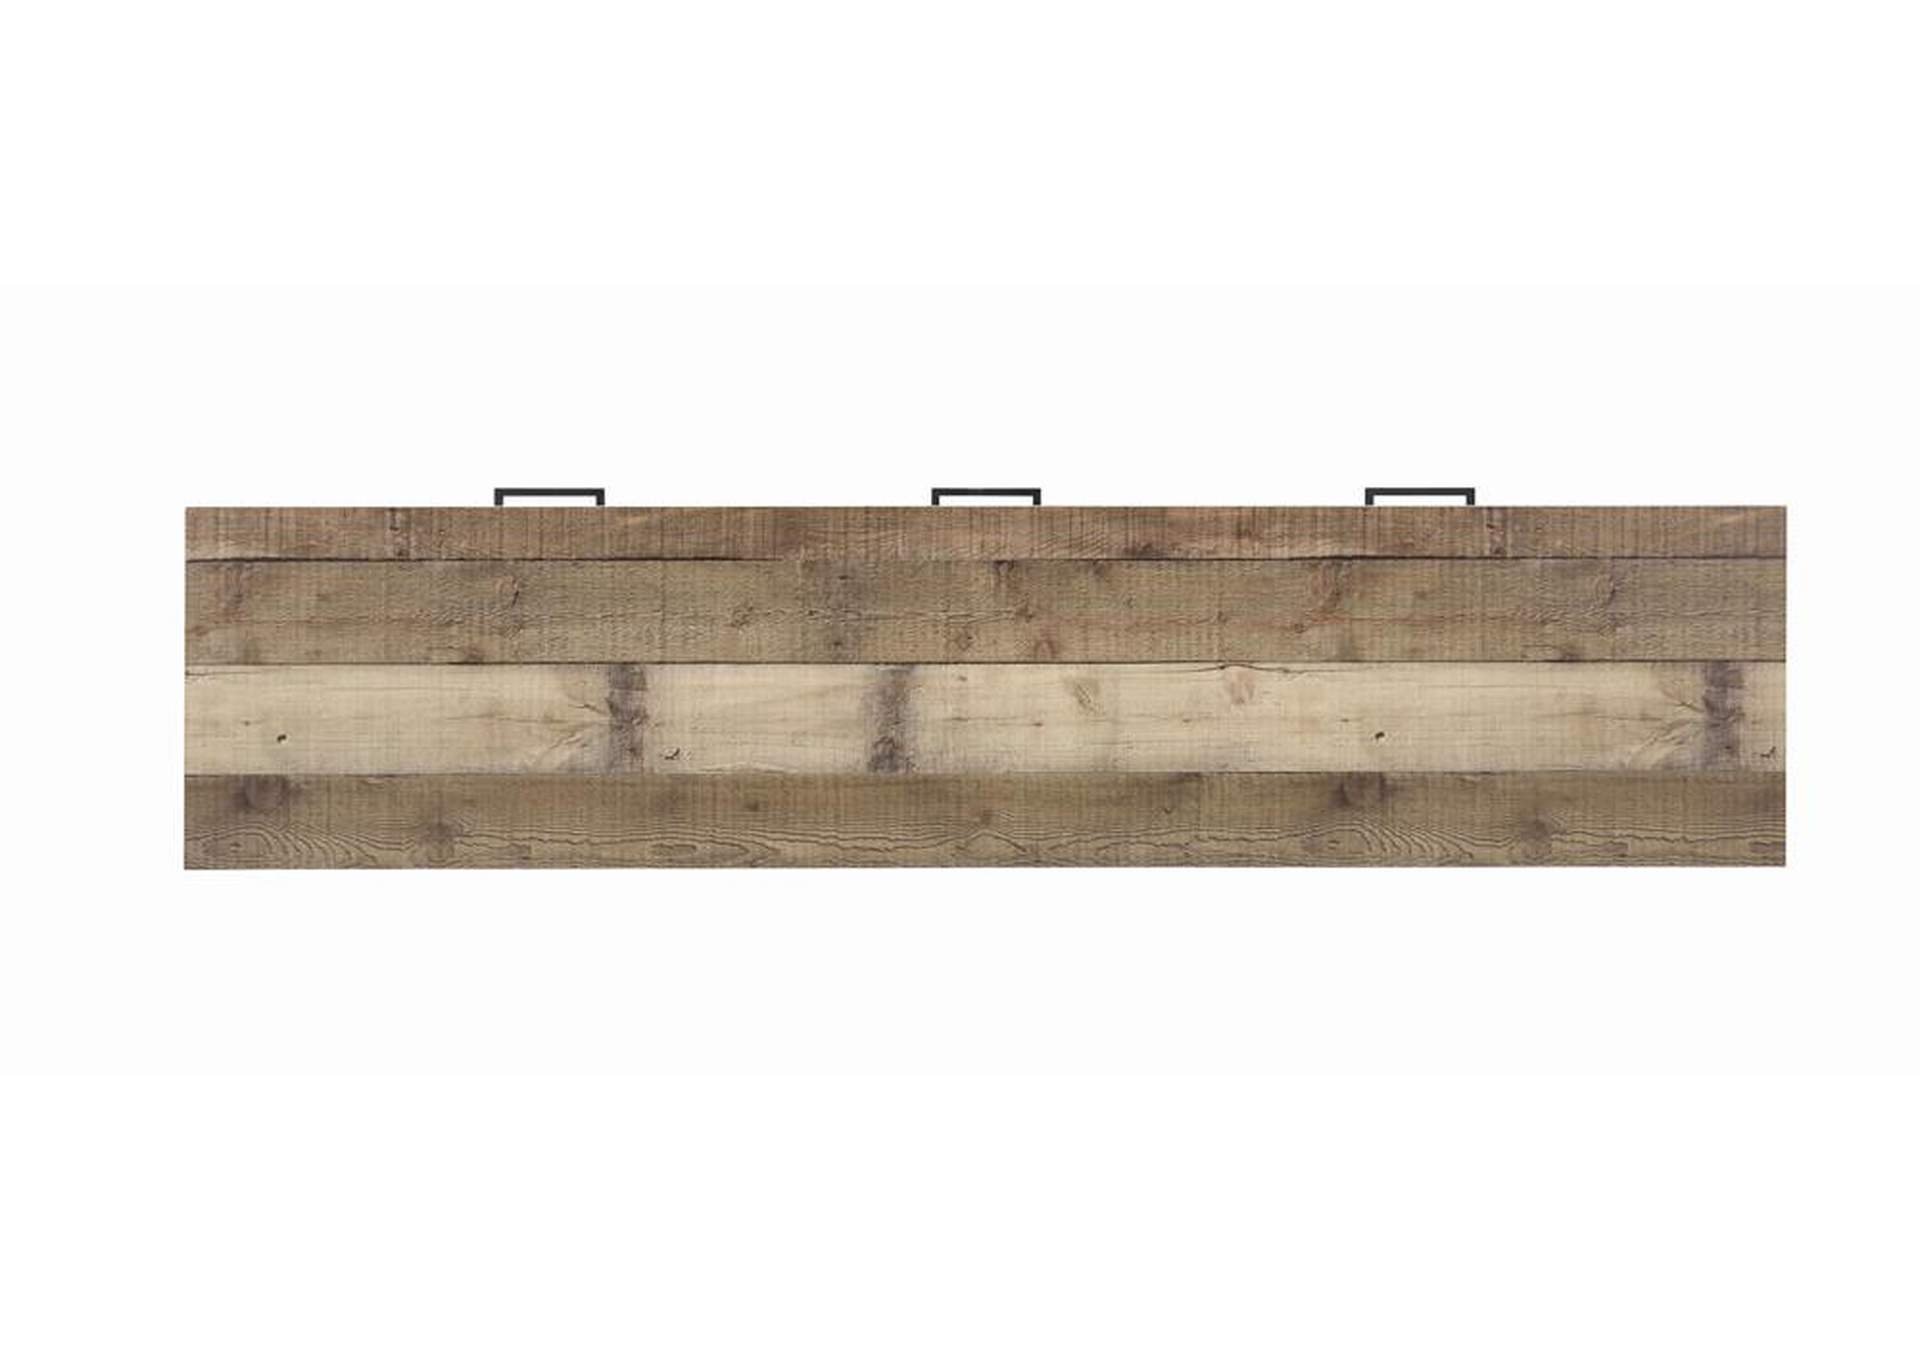 71" 3-drawer TV Console Weathered Pine,Coaster Furniture